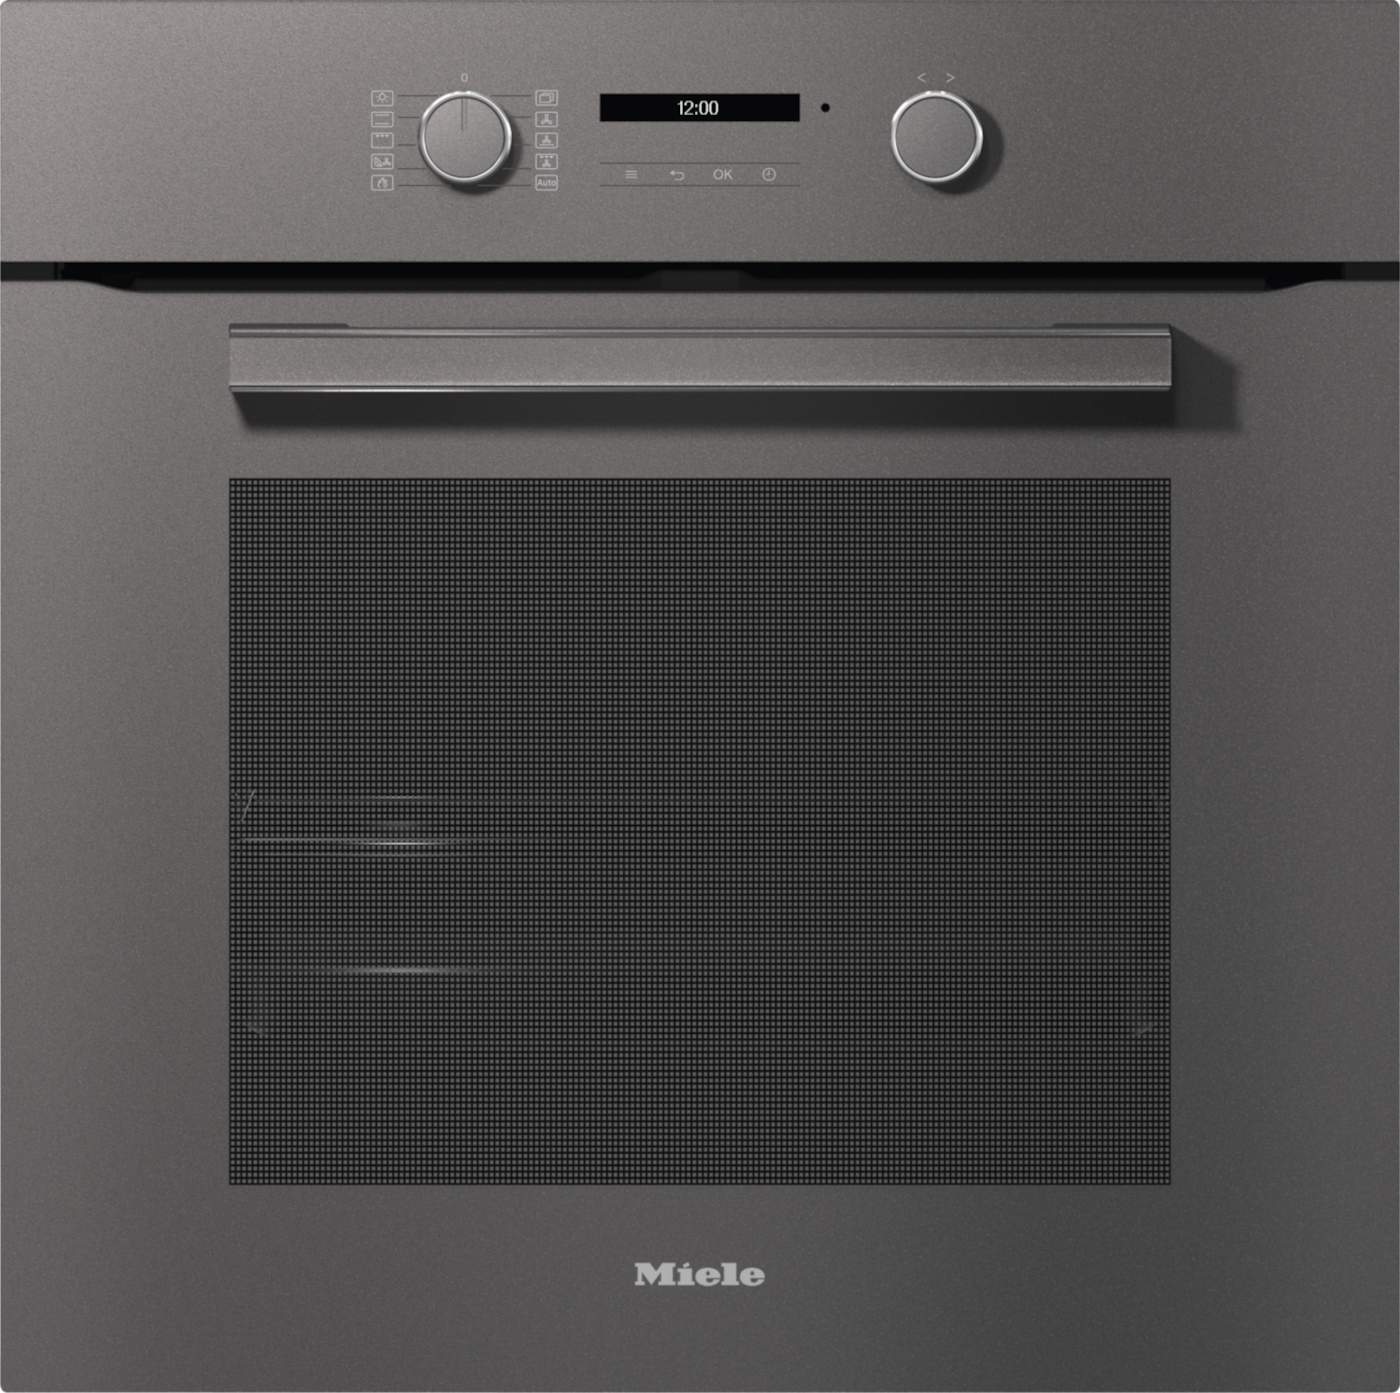 H2861BP OVEN GRAPHITE GREY product photo